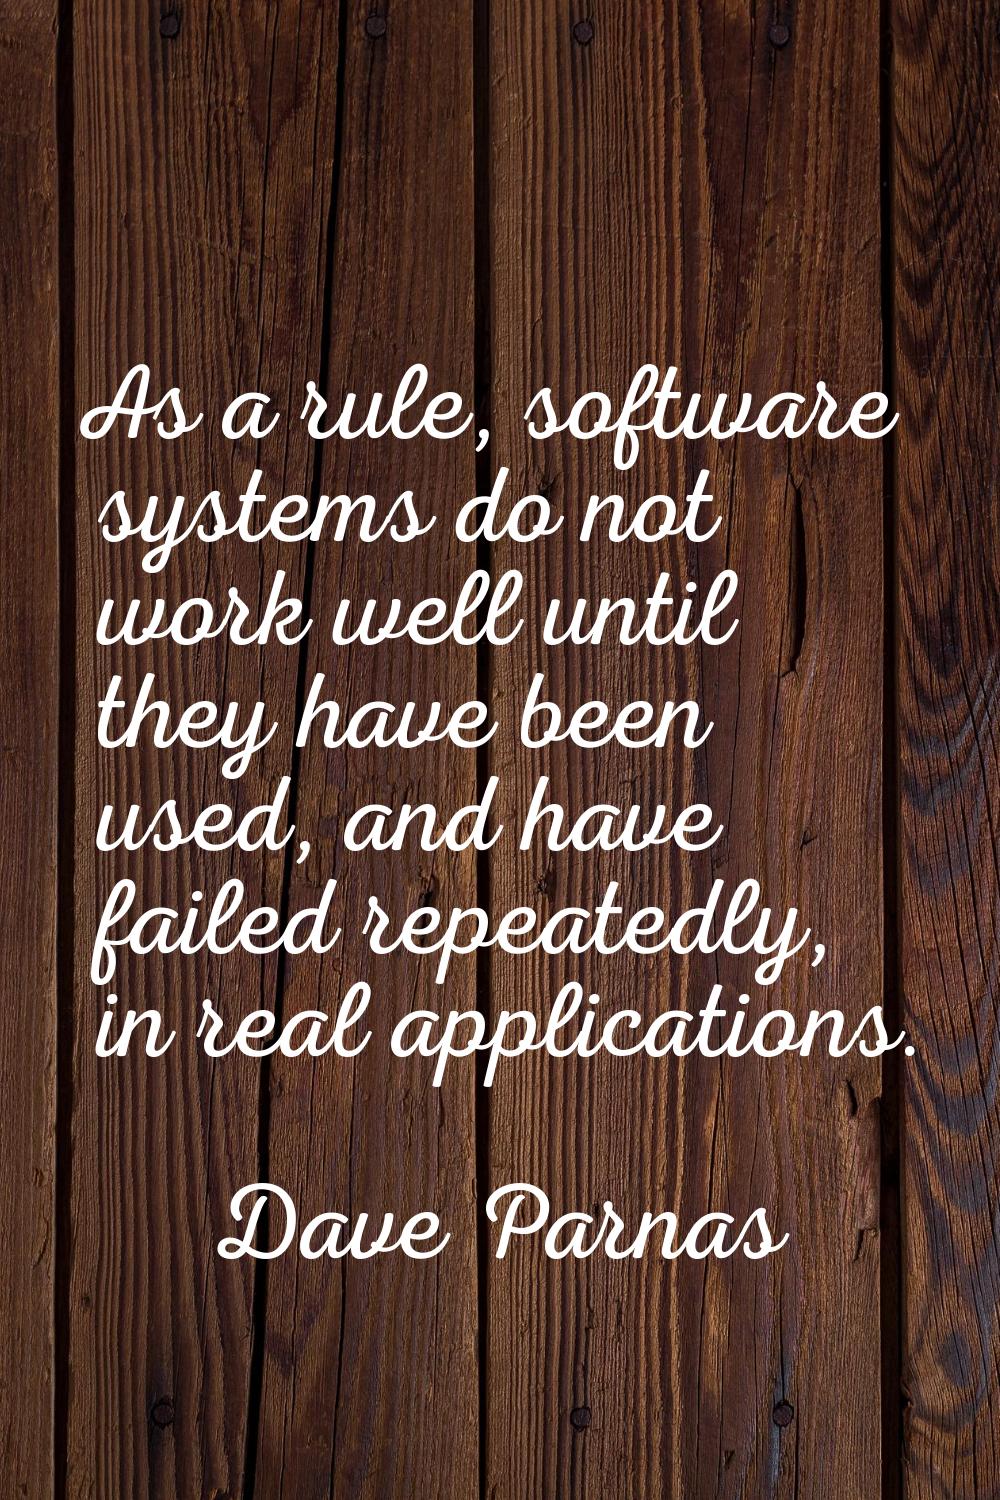 As a rule, software systems do not work well until they have been used, and have failed repeatedly,